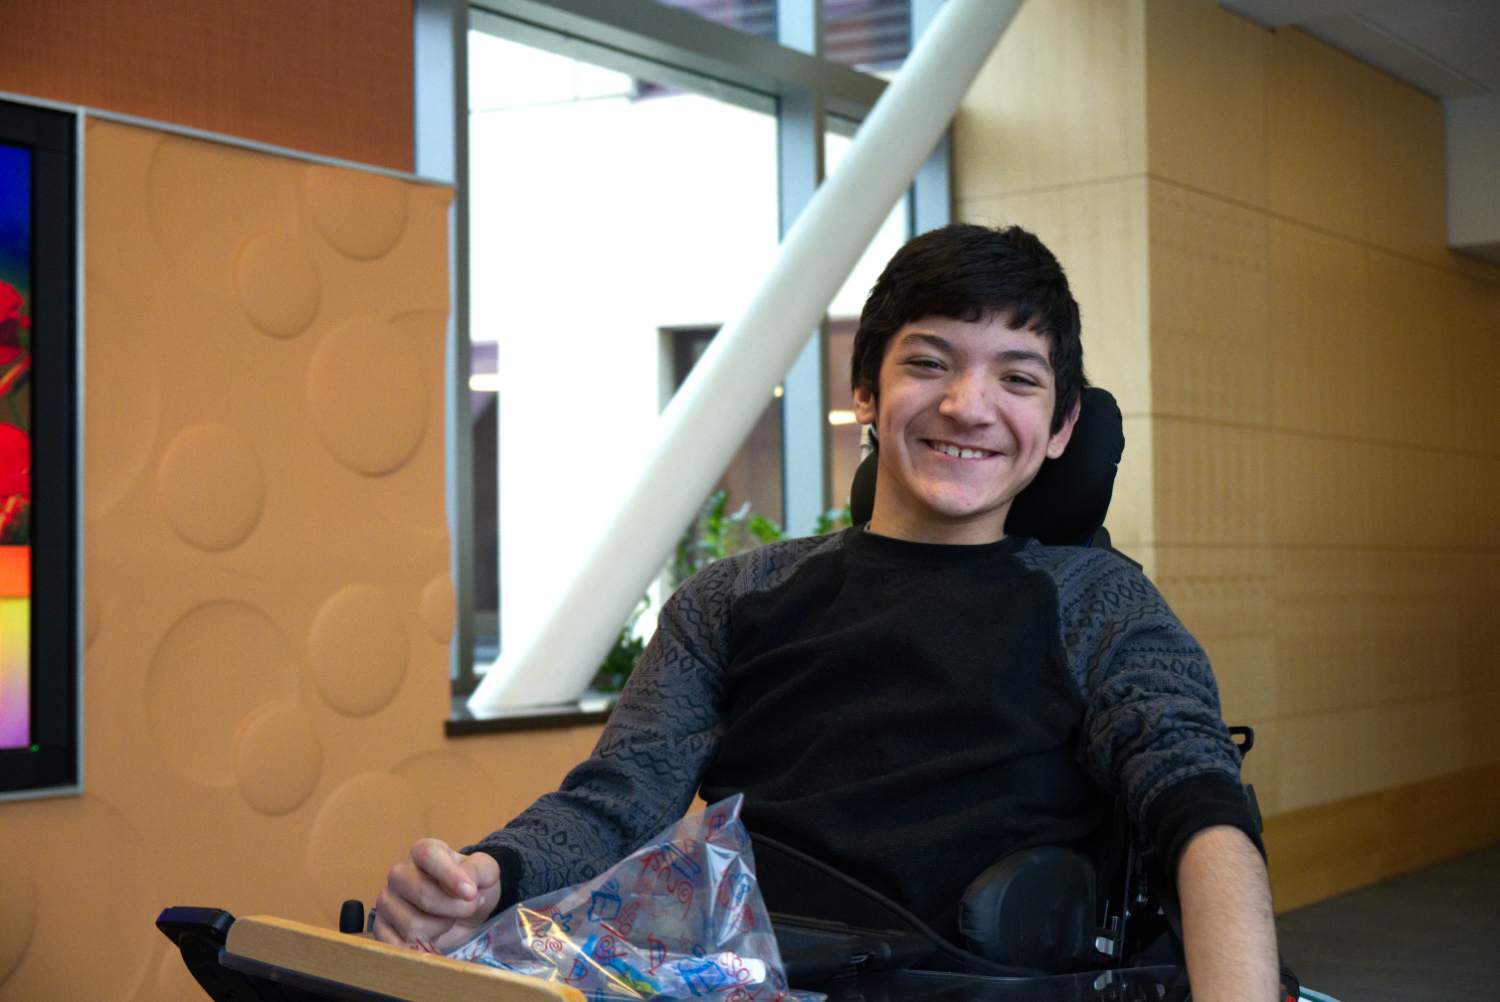 Louie Romero is all smiles at Gillette Children's